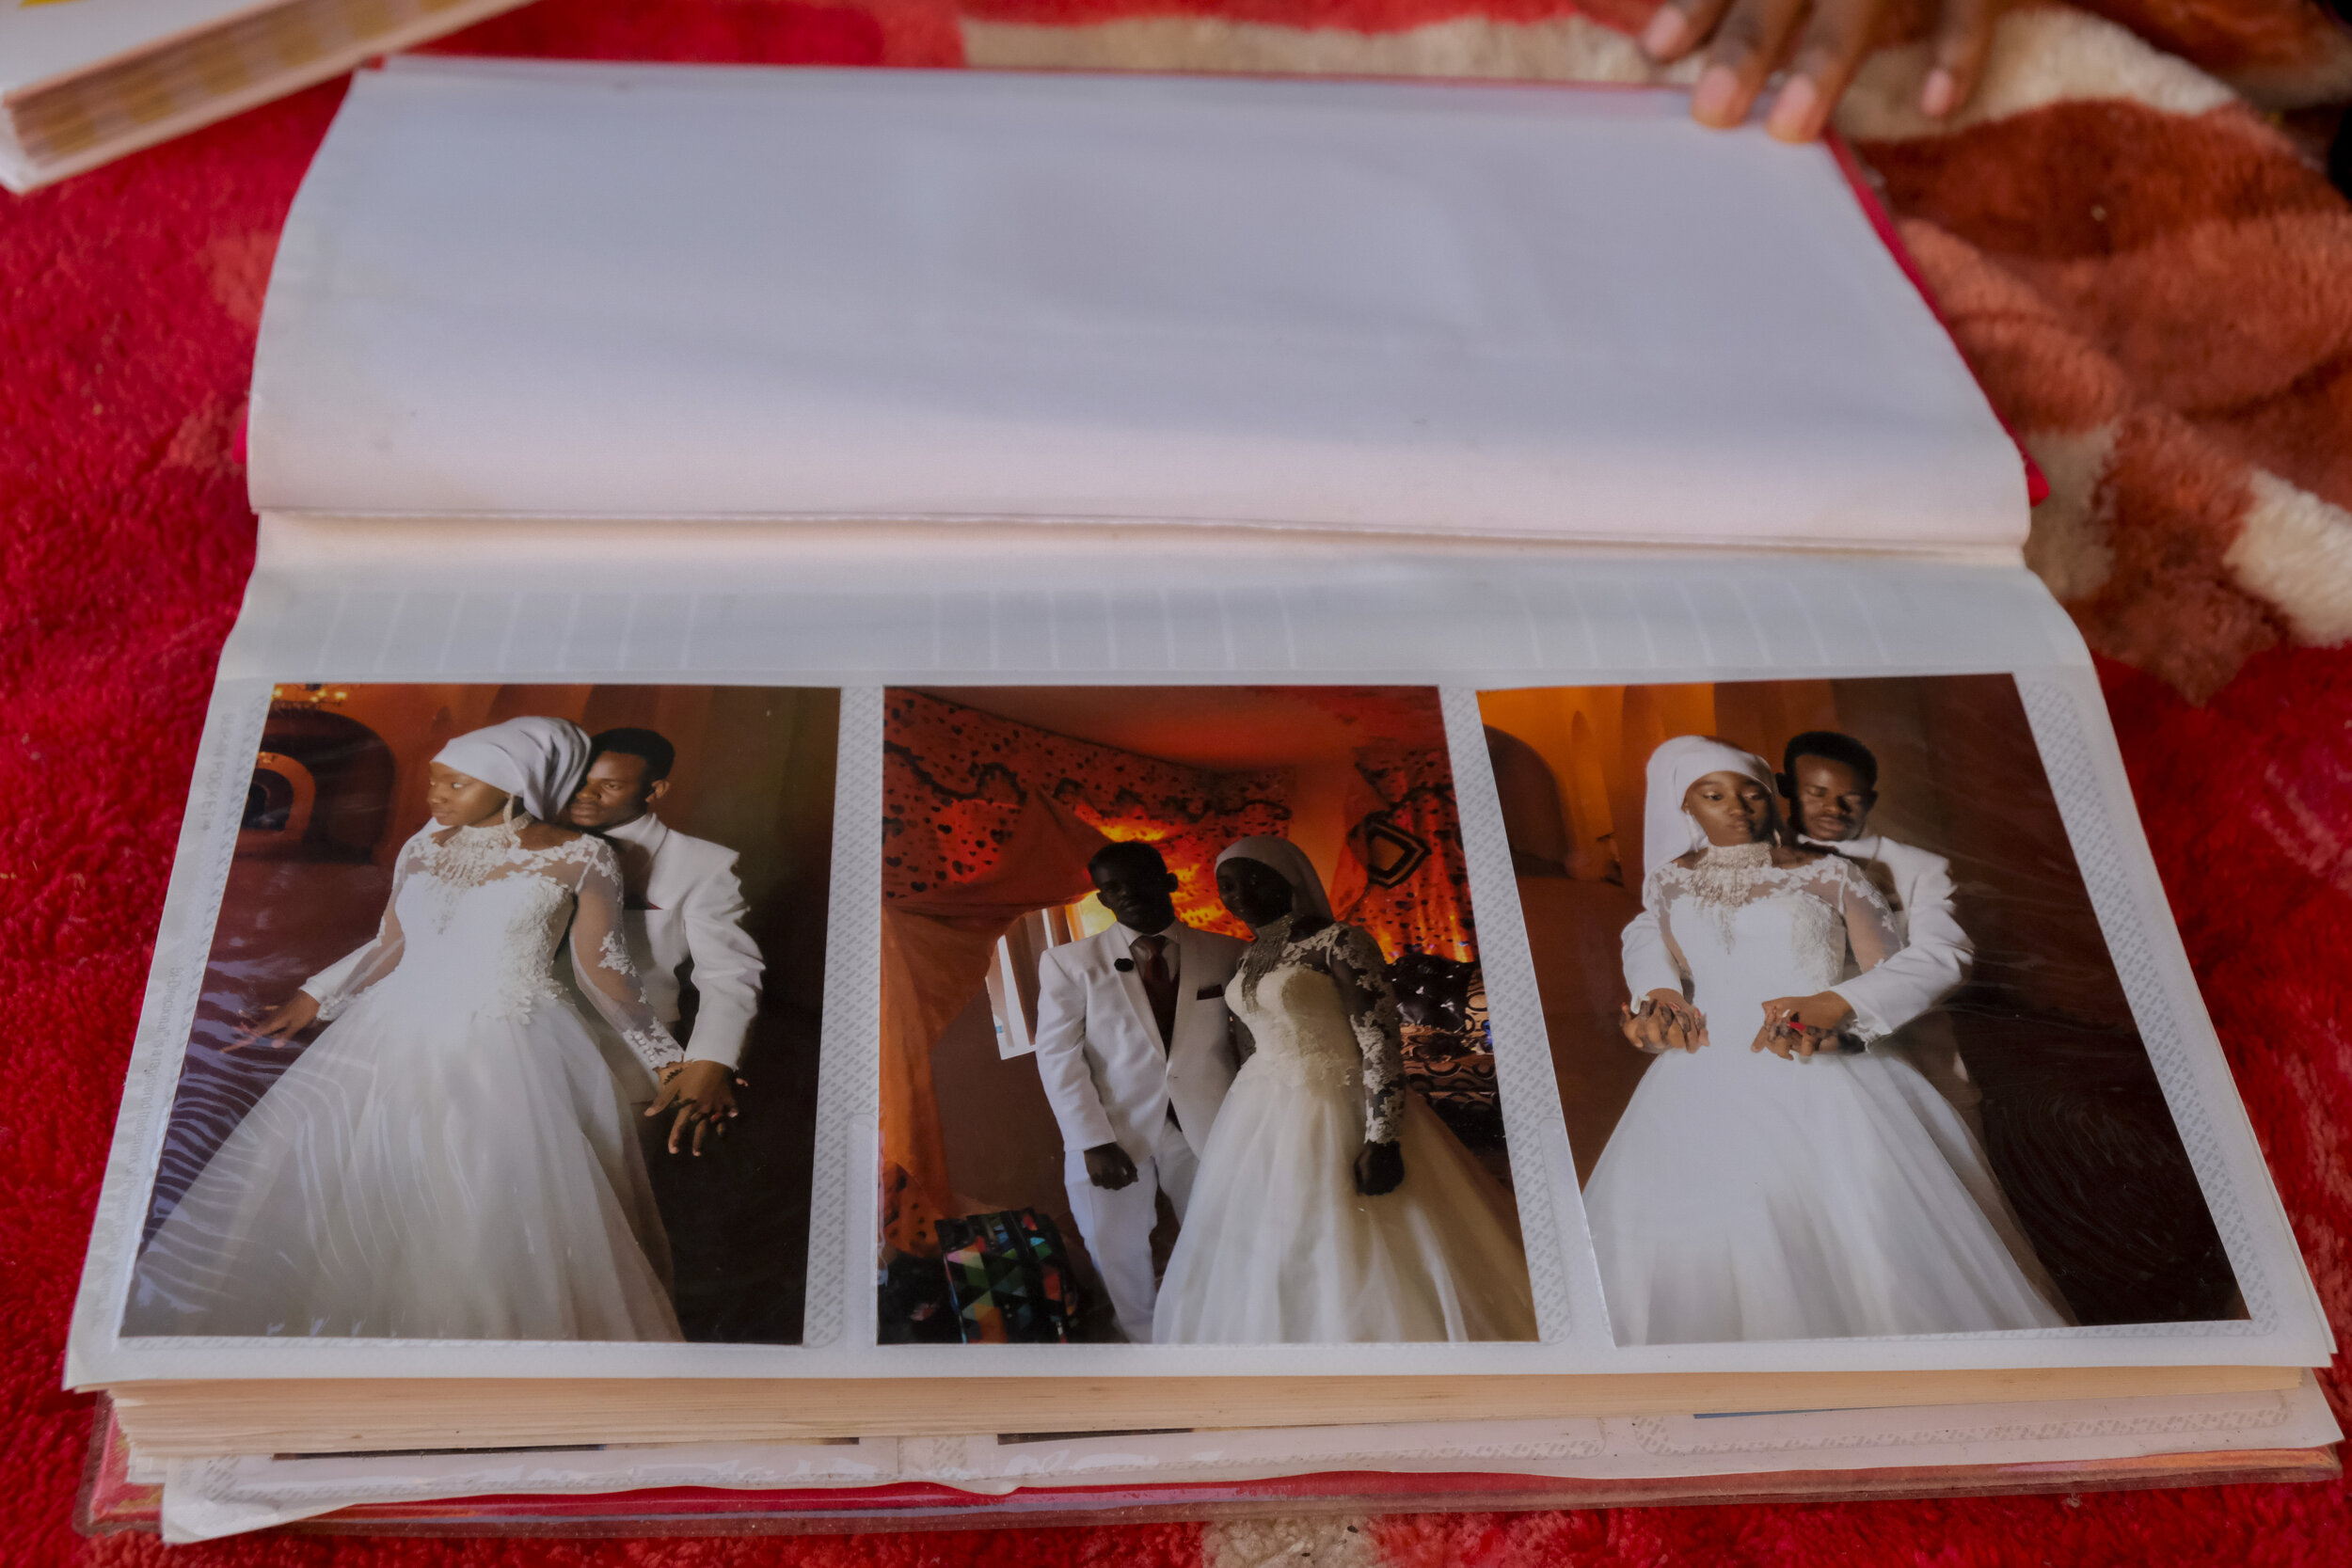  USA, San Diego, CA, October 19, 2020. Photographs Musa shot of her sister’s wedding. Musa was previously married and later divorced at 19. When she arrived as a refugee from Somalia at age 14, Musa fell in love with photography.&nbsp; Her family had